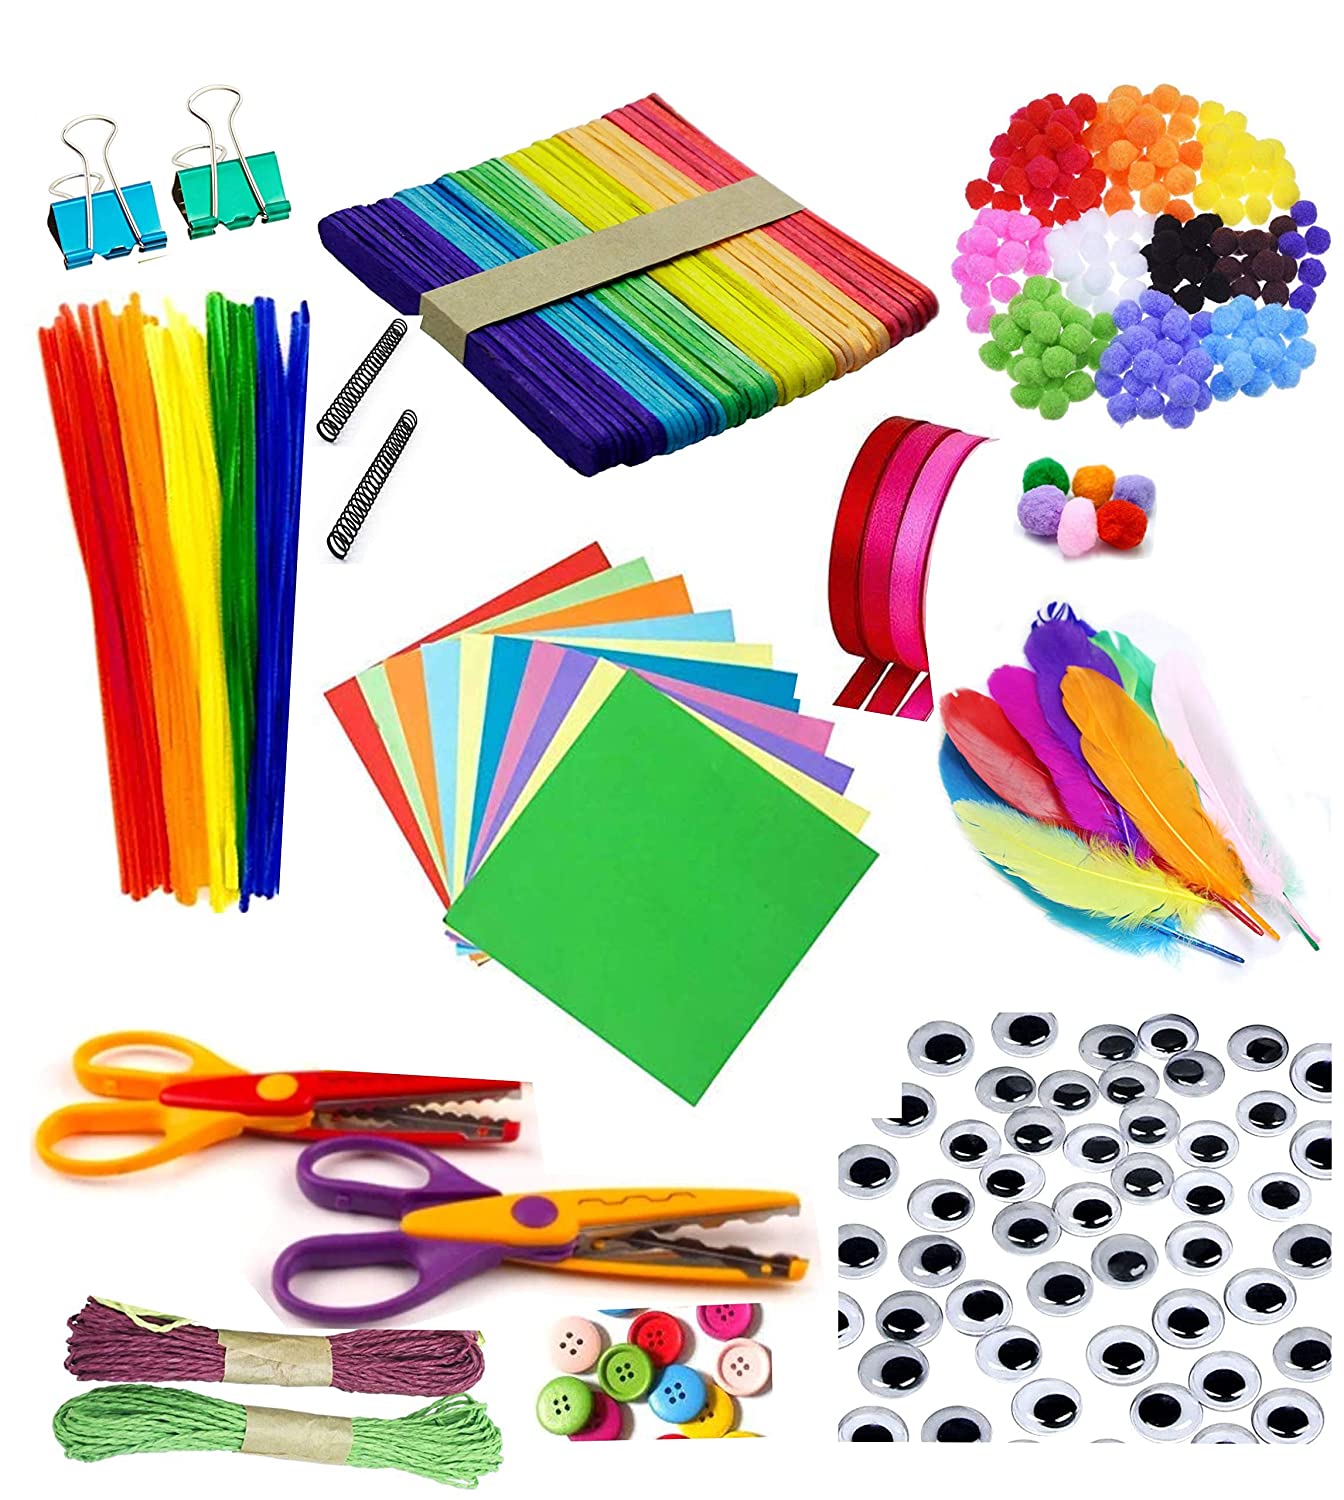 Imprint  Arts and Crafts Supplies Kit Over 1000 Pieces with a